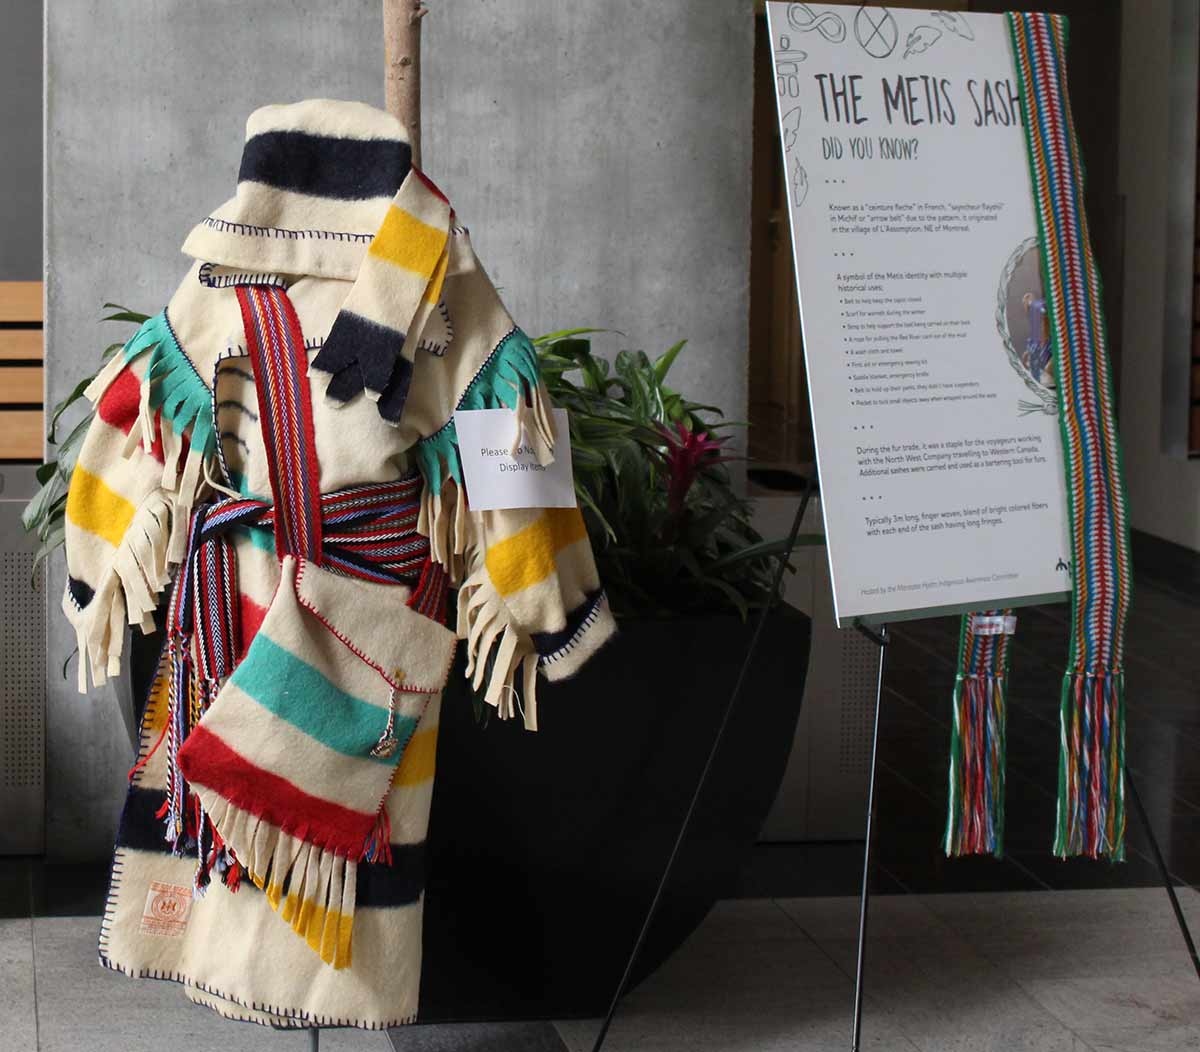 National Indigenous Peoples Day 2019 was recognized with displays in the main floor gallery at Manitoba Hydro Place in Winnipeg, MB.